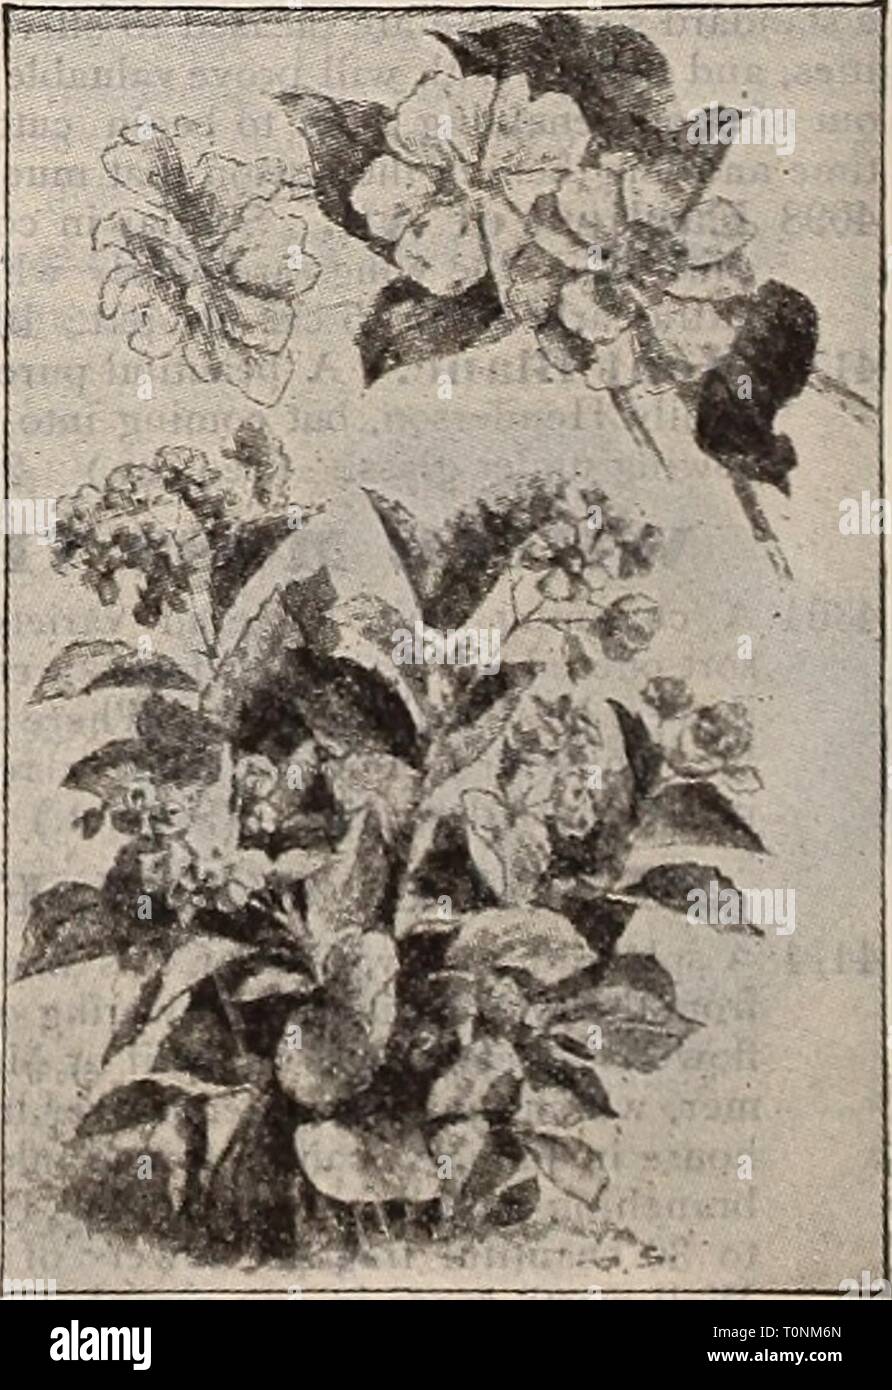 Dreer's 1901 garden calendar (1901) Dreer's 1901 garden calendar  dreers1901garden1901henr Year: 1901  Arabis Alpina Fl. Pl. BEGONIA CAEEDONIA. The White-flowerius Gloire tie Lorraine. Of the many Begonias now in cultivation, none has become so quickly popular as Gloire de Lorraine. Many florists in the larger cities grow entire houses of this variety alone I'or Christmas sales, at which time plants in 6-inch [lols frequently sell at from $3.00 to $6.00 each. In Caledonia we have an exact counterpart of Lorraine, except in color, which, in place of pink, is a pleasing pearly-white. The plant h Stock Photo